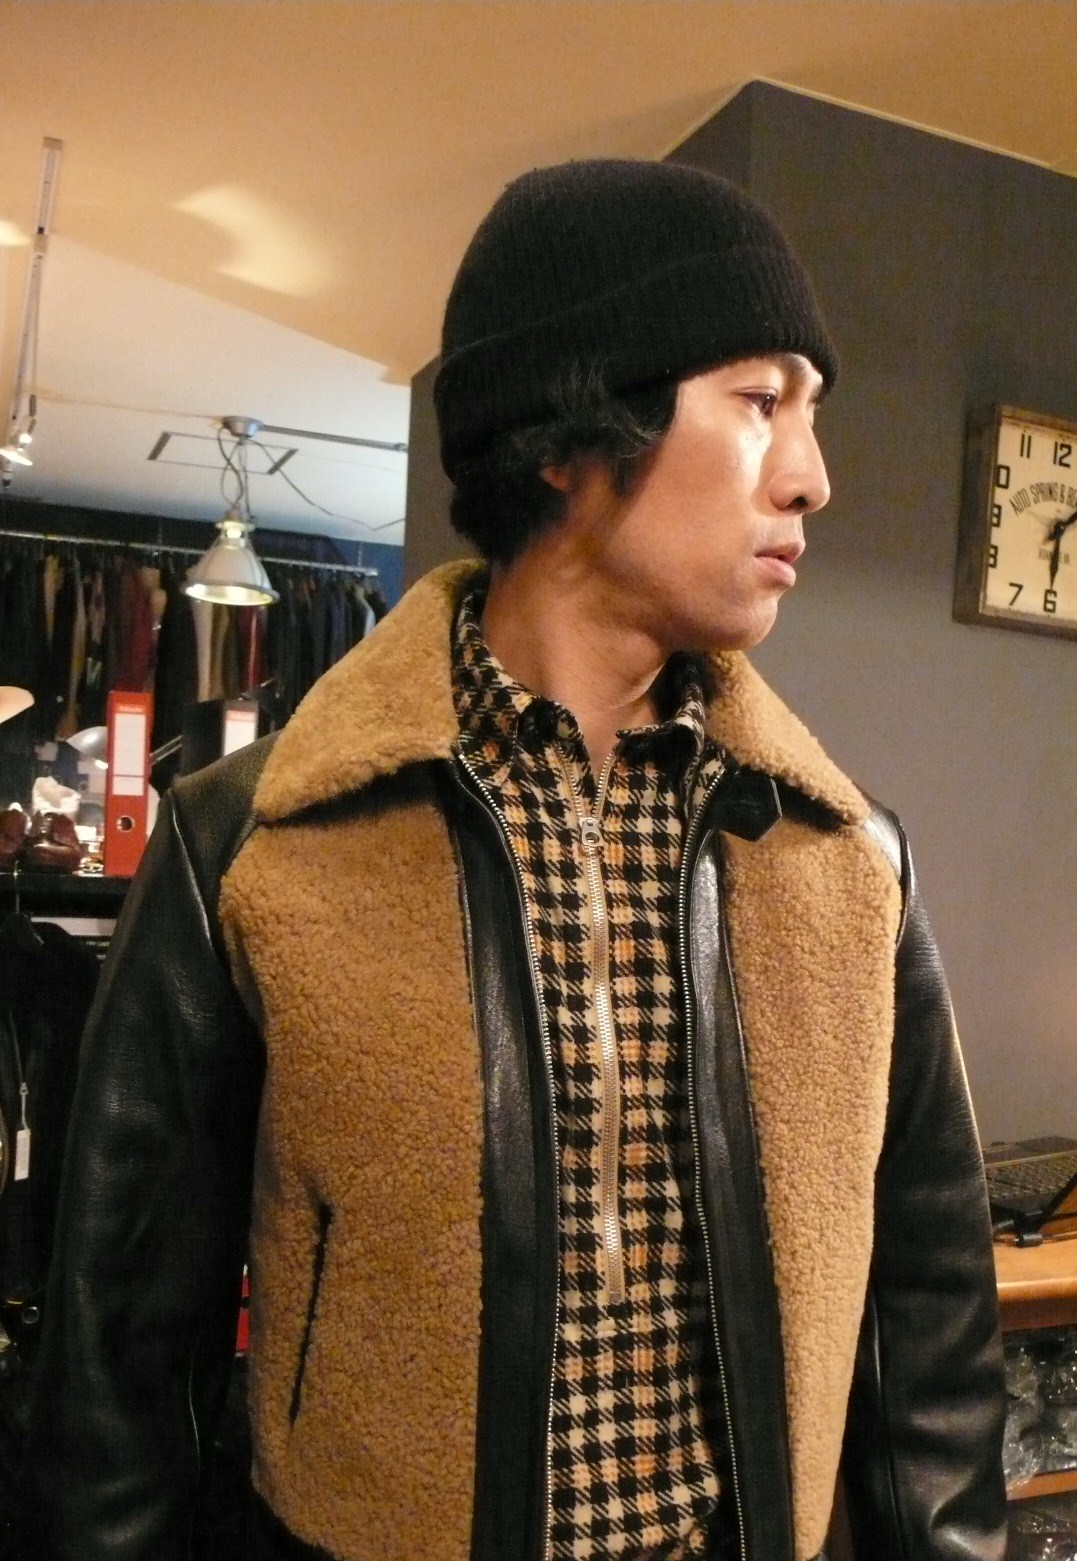 WARP AND WOOF: Original GRIZZLY JACKET の縫製確認先上げが届きましたが、シャツの試着画像です。